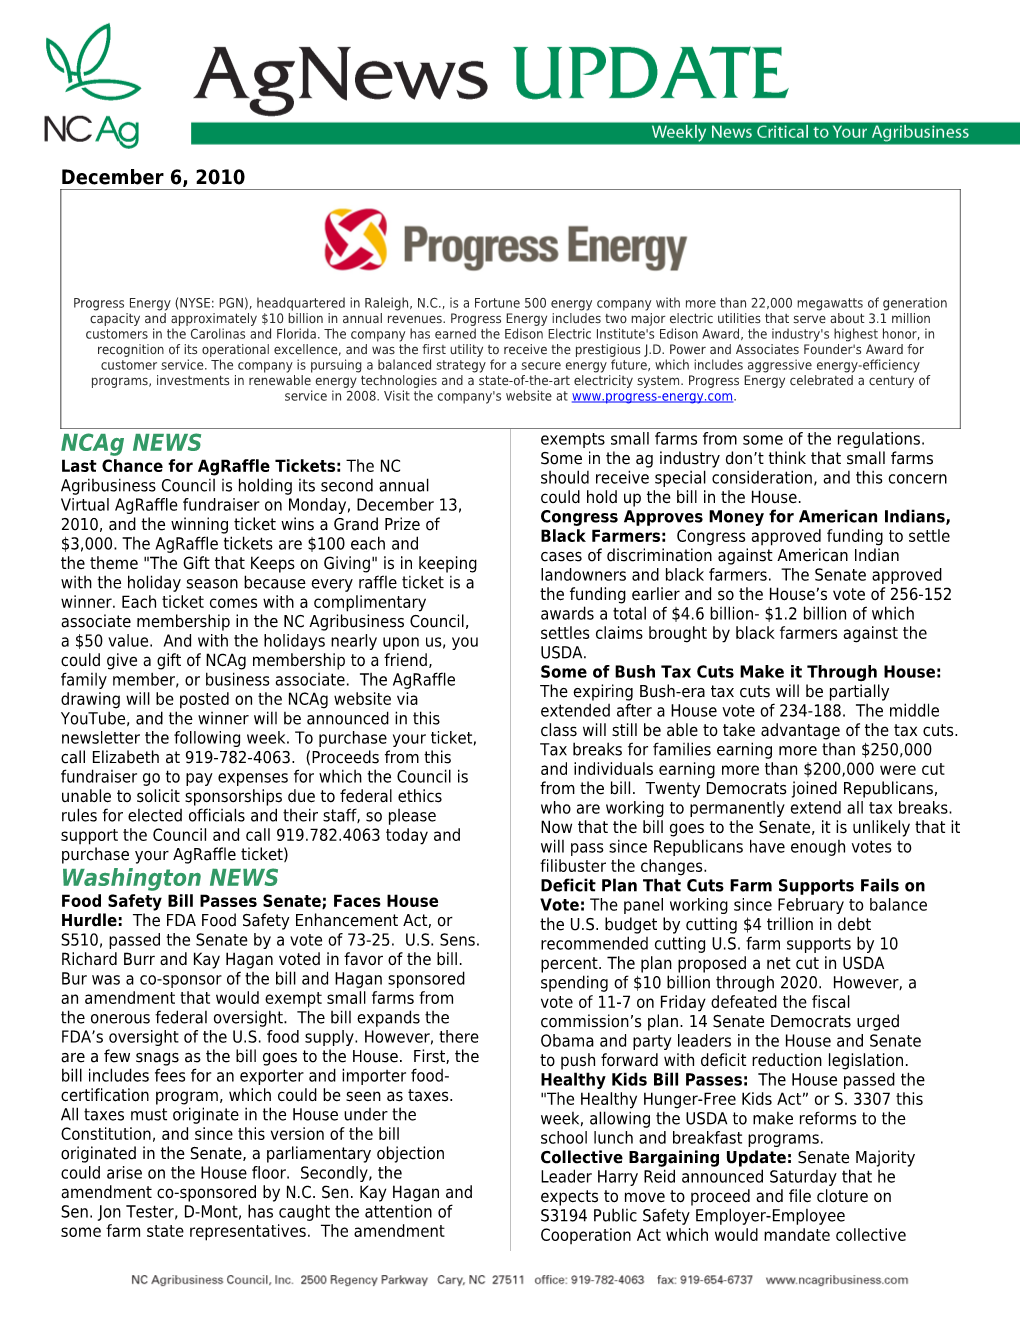 Progress Energy (NYSE: PGN), Headquartered in Raleigh, N.C., Is a Fortune 500 Energy Company